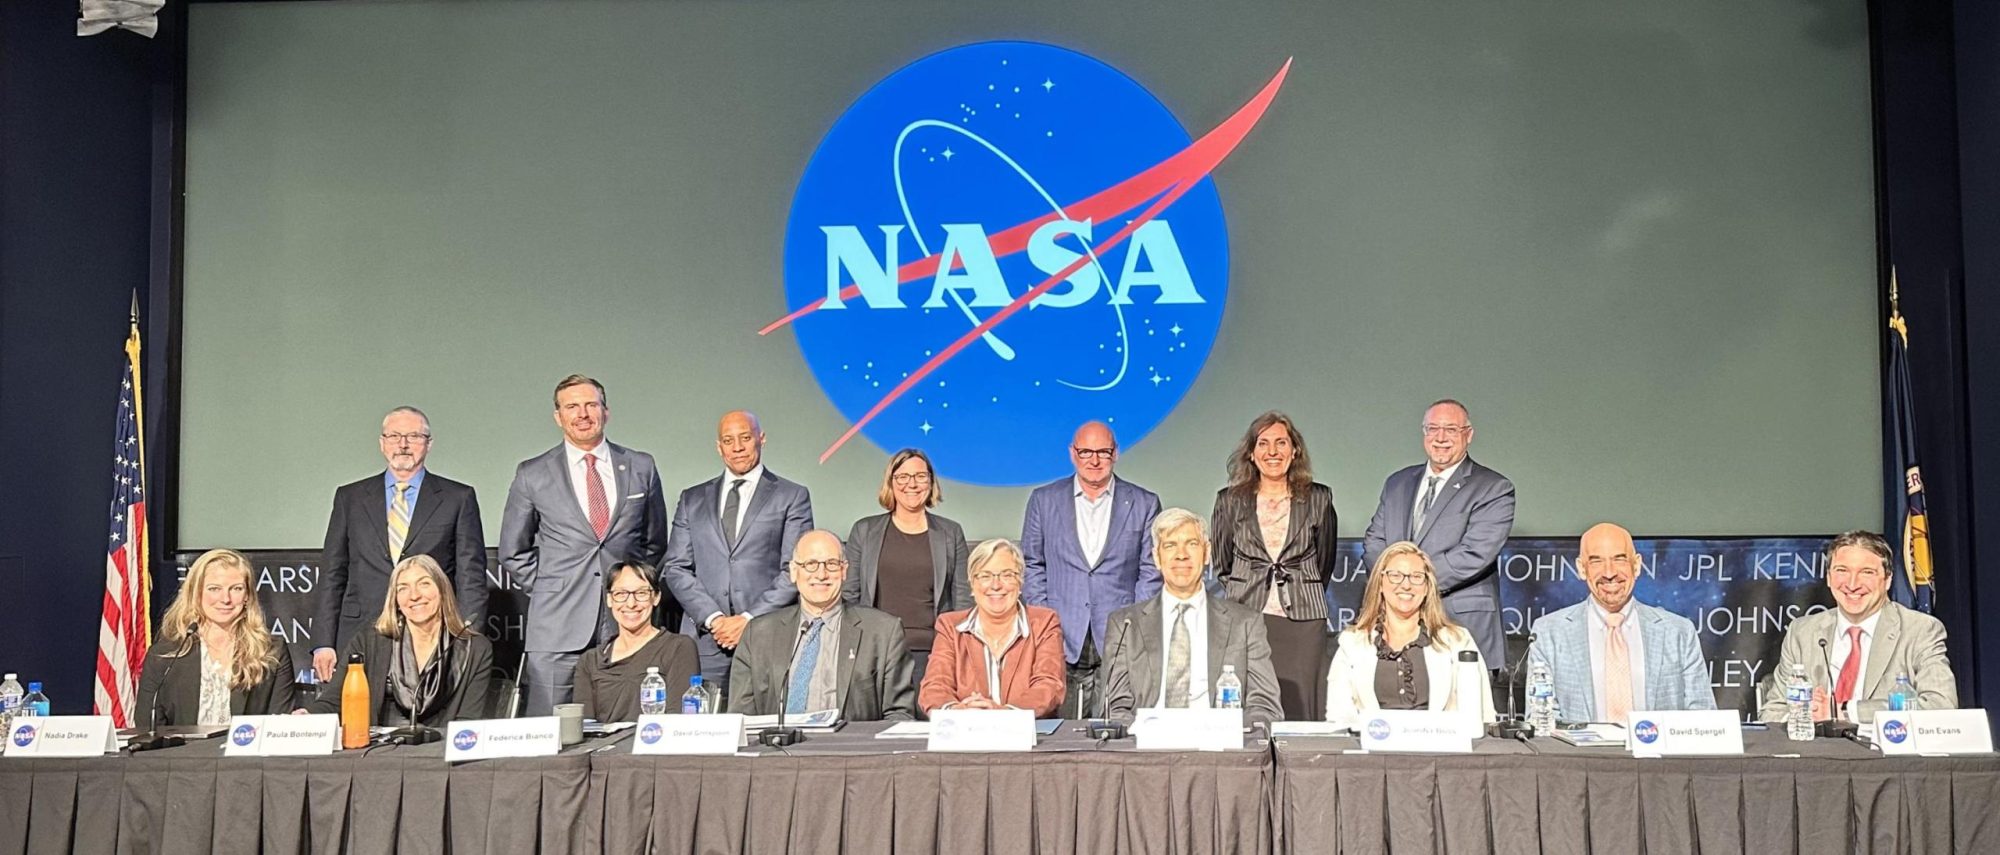 NASA UFO team calls for higher quality data in first public meeting, Science